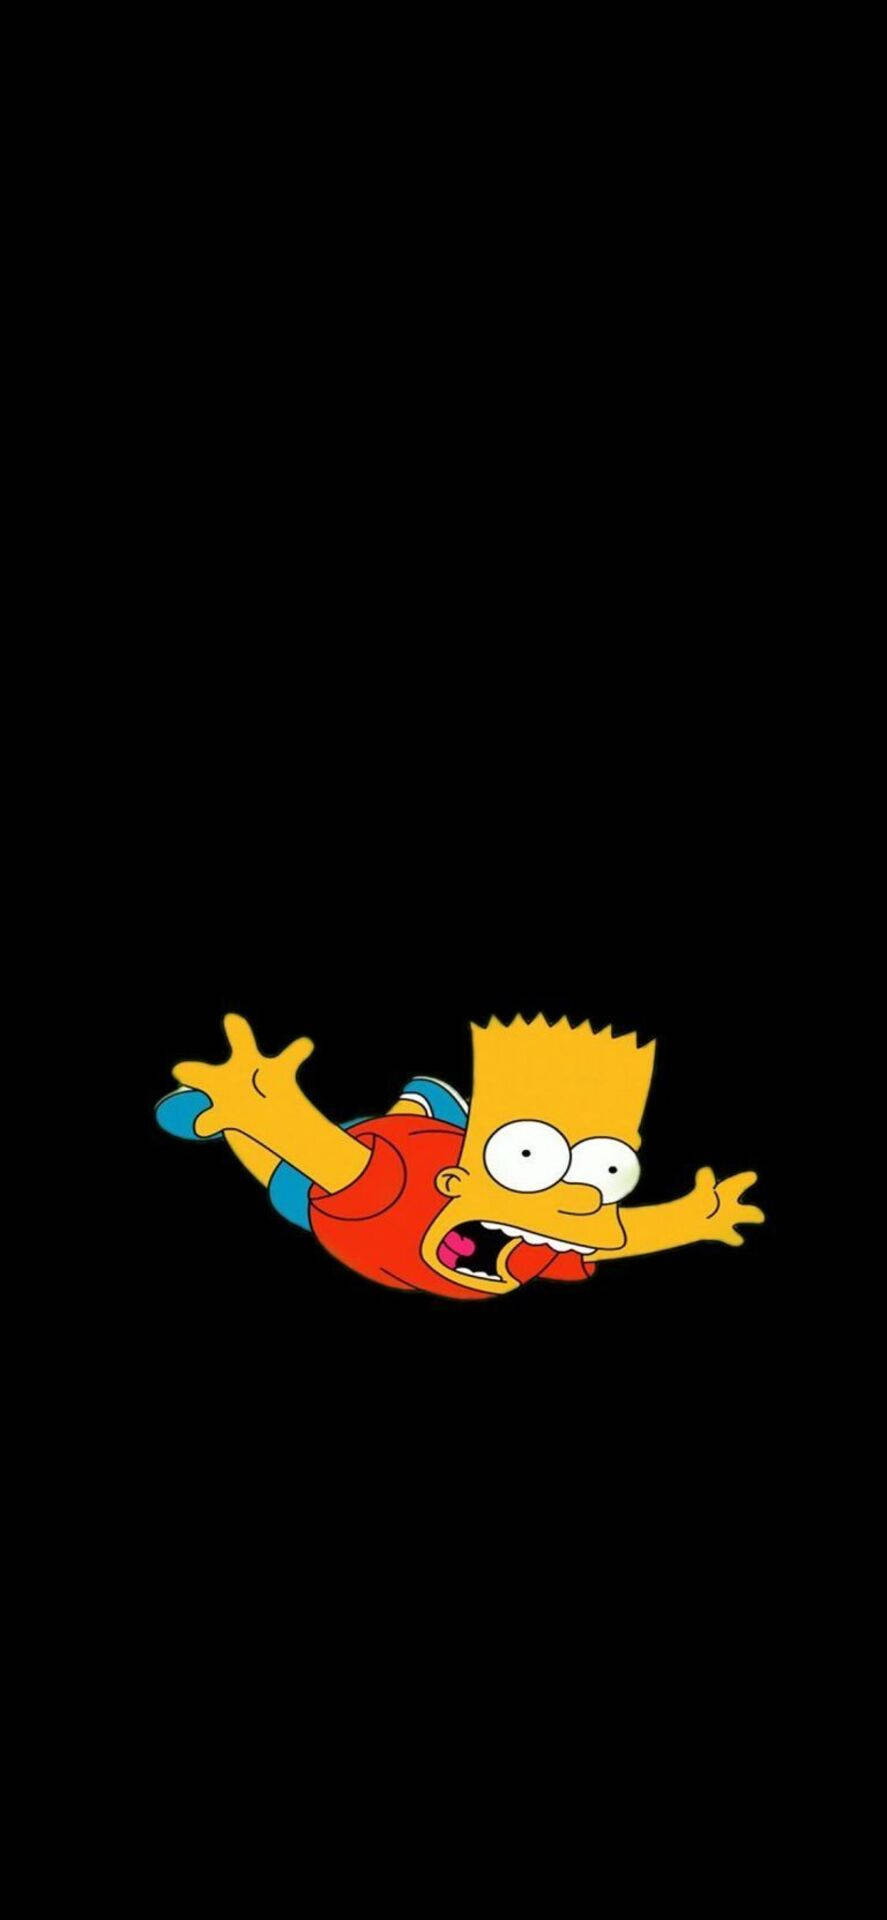 Falling Bart Simpson Home Screen Background